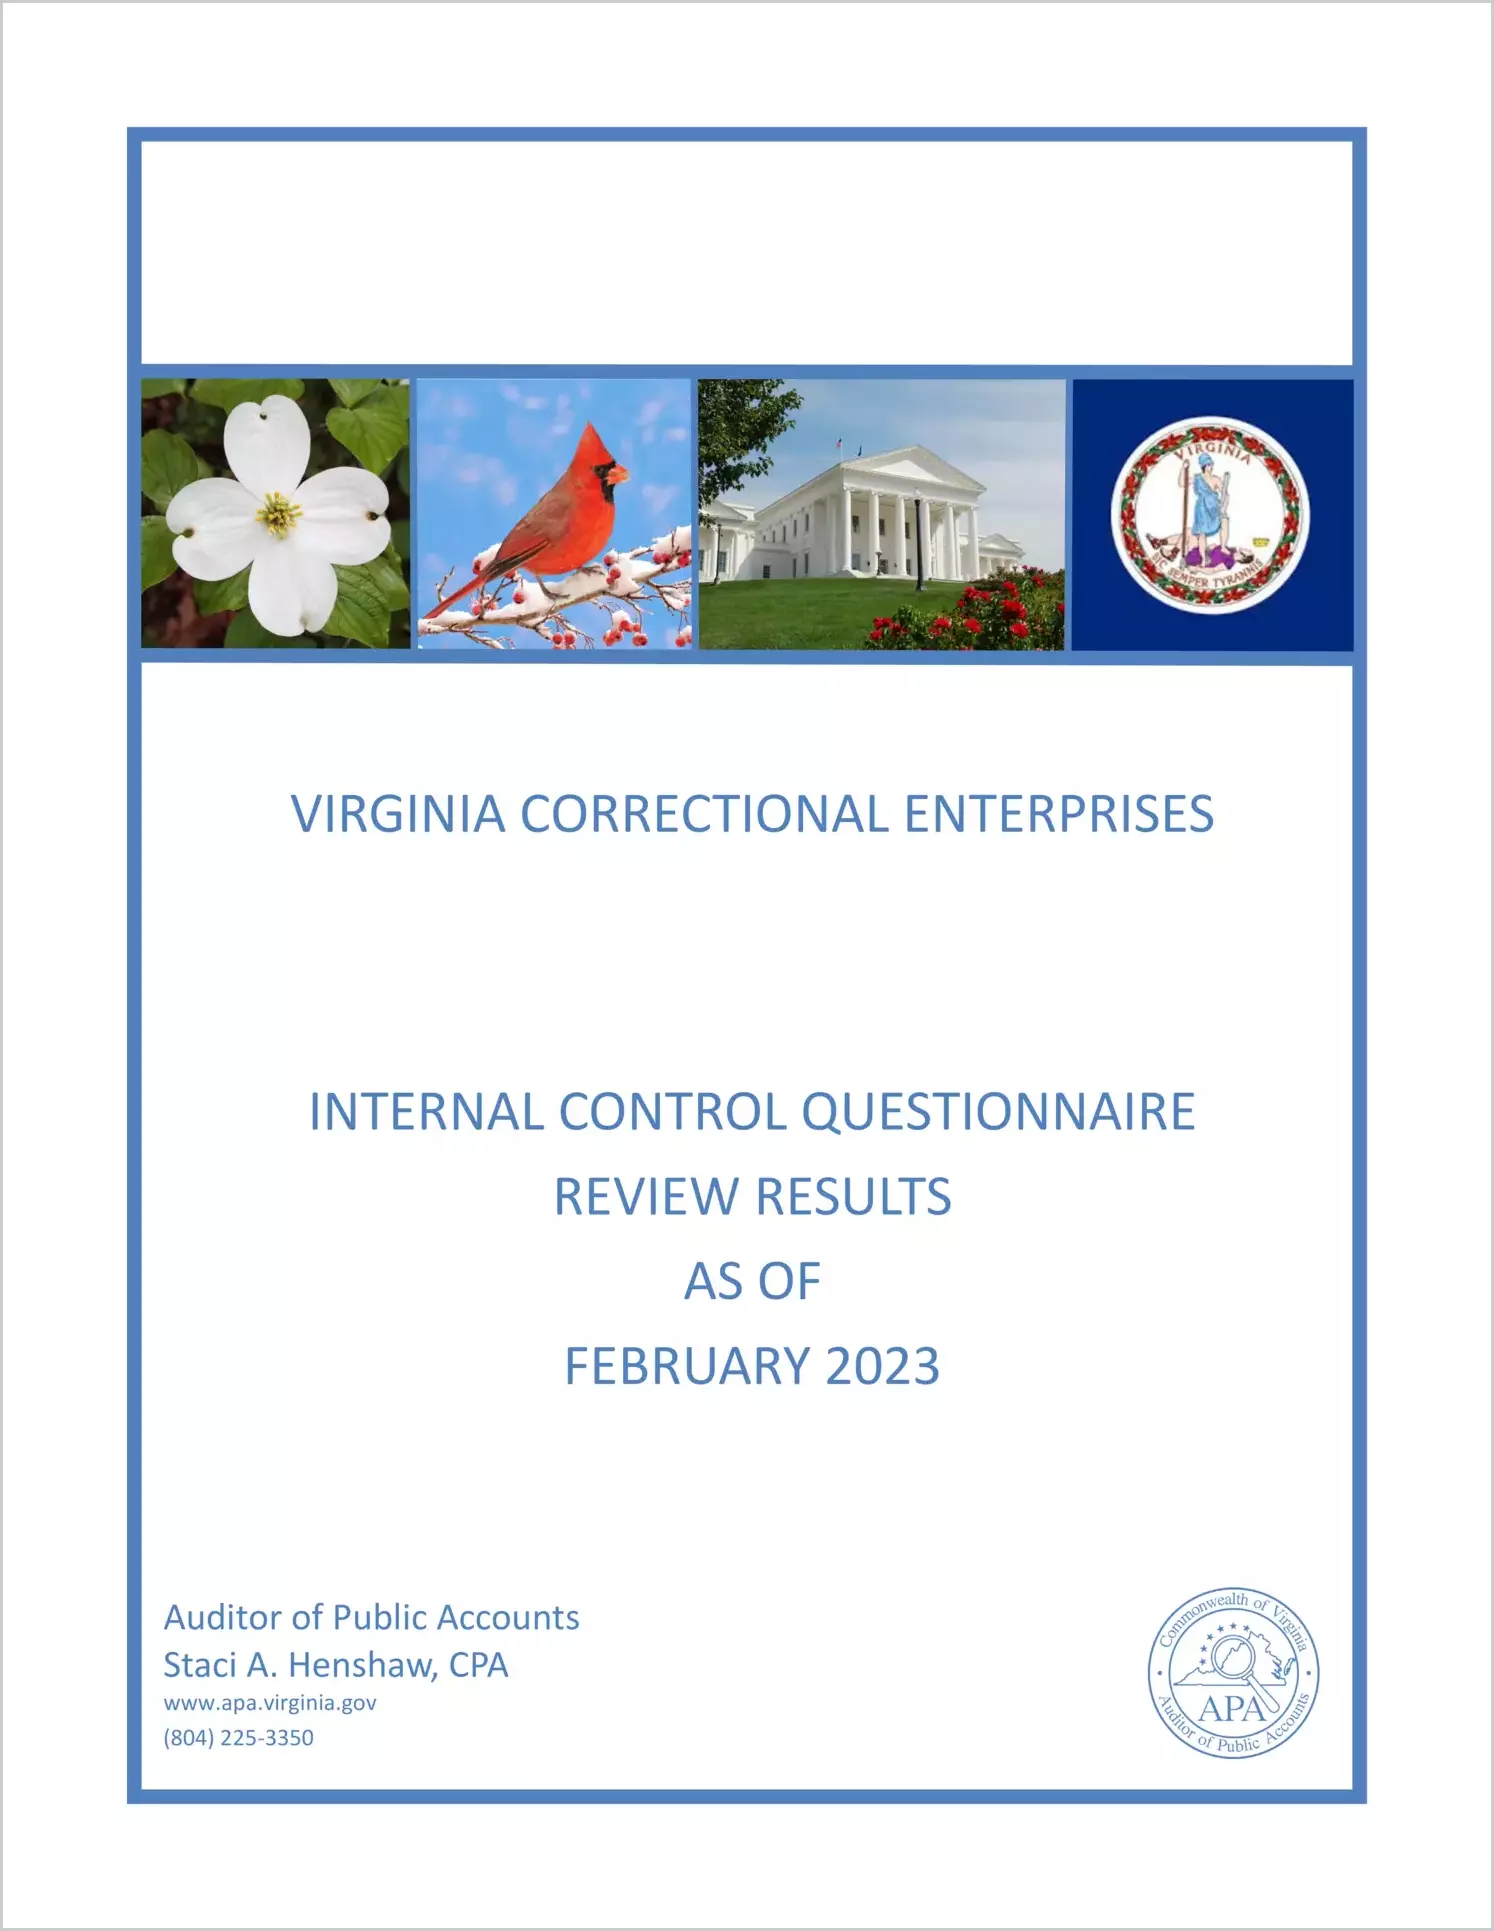 Virginia Correctional Enterprises Internal Control Questionnaire Review Results as of February 2023